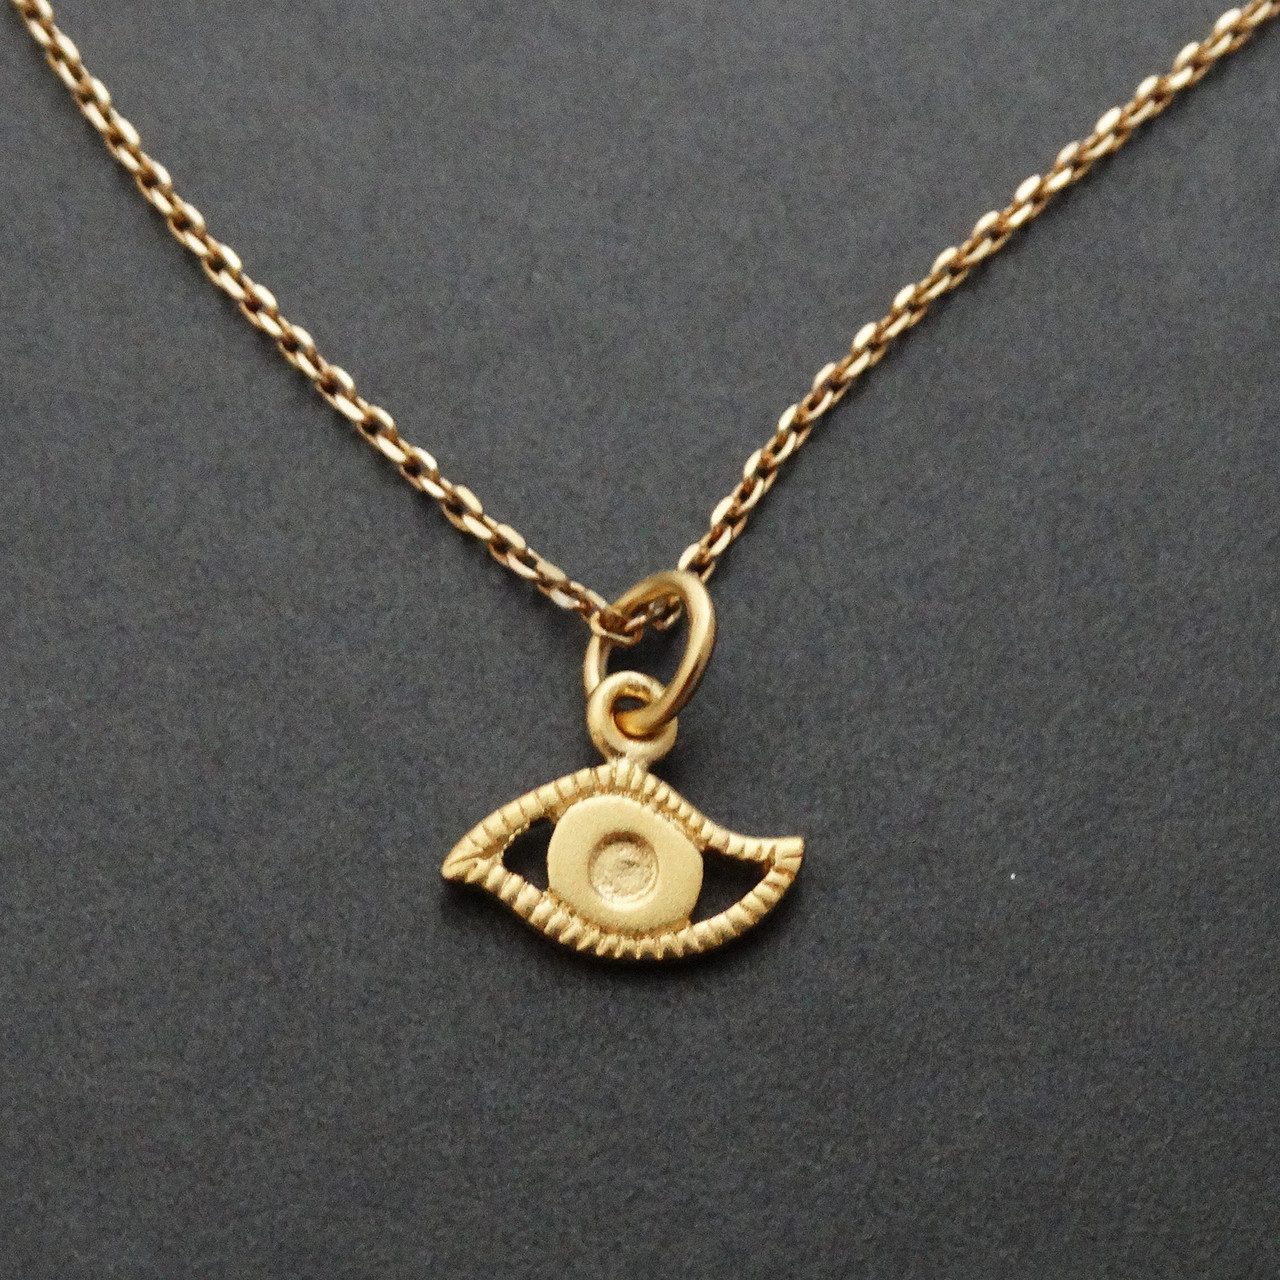 Evil Eye Necklace, 24K Gold Plated, Nazar, Coin Necklace, Her Watchful  Gaze, Gold Coin Pendant, Greek Jewelry, Talisman, Birthday Gifts - Etsy